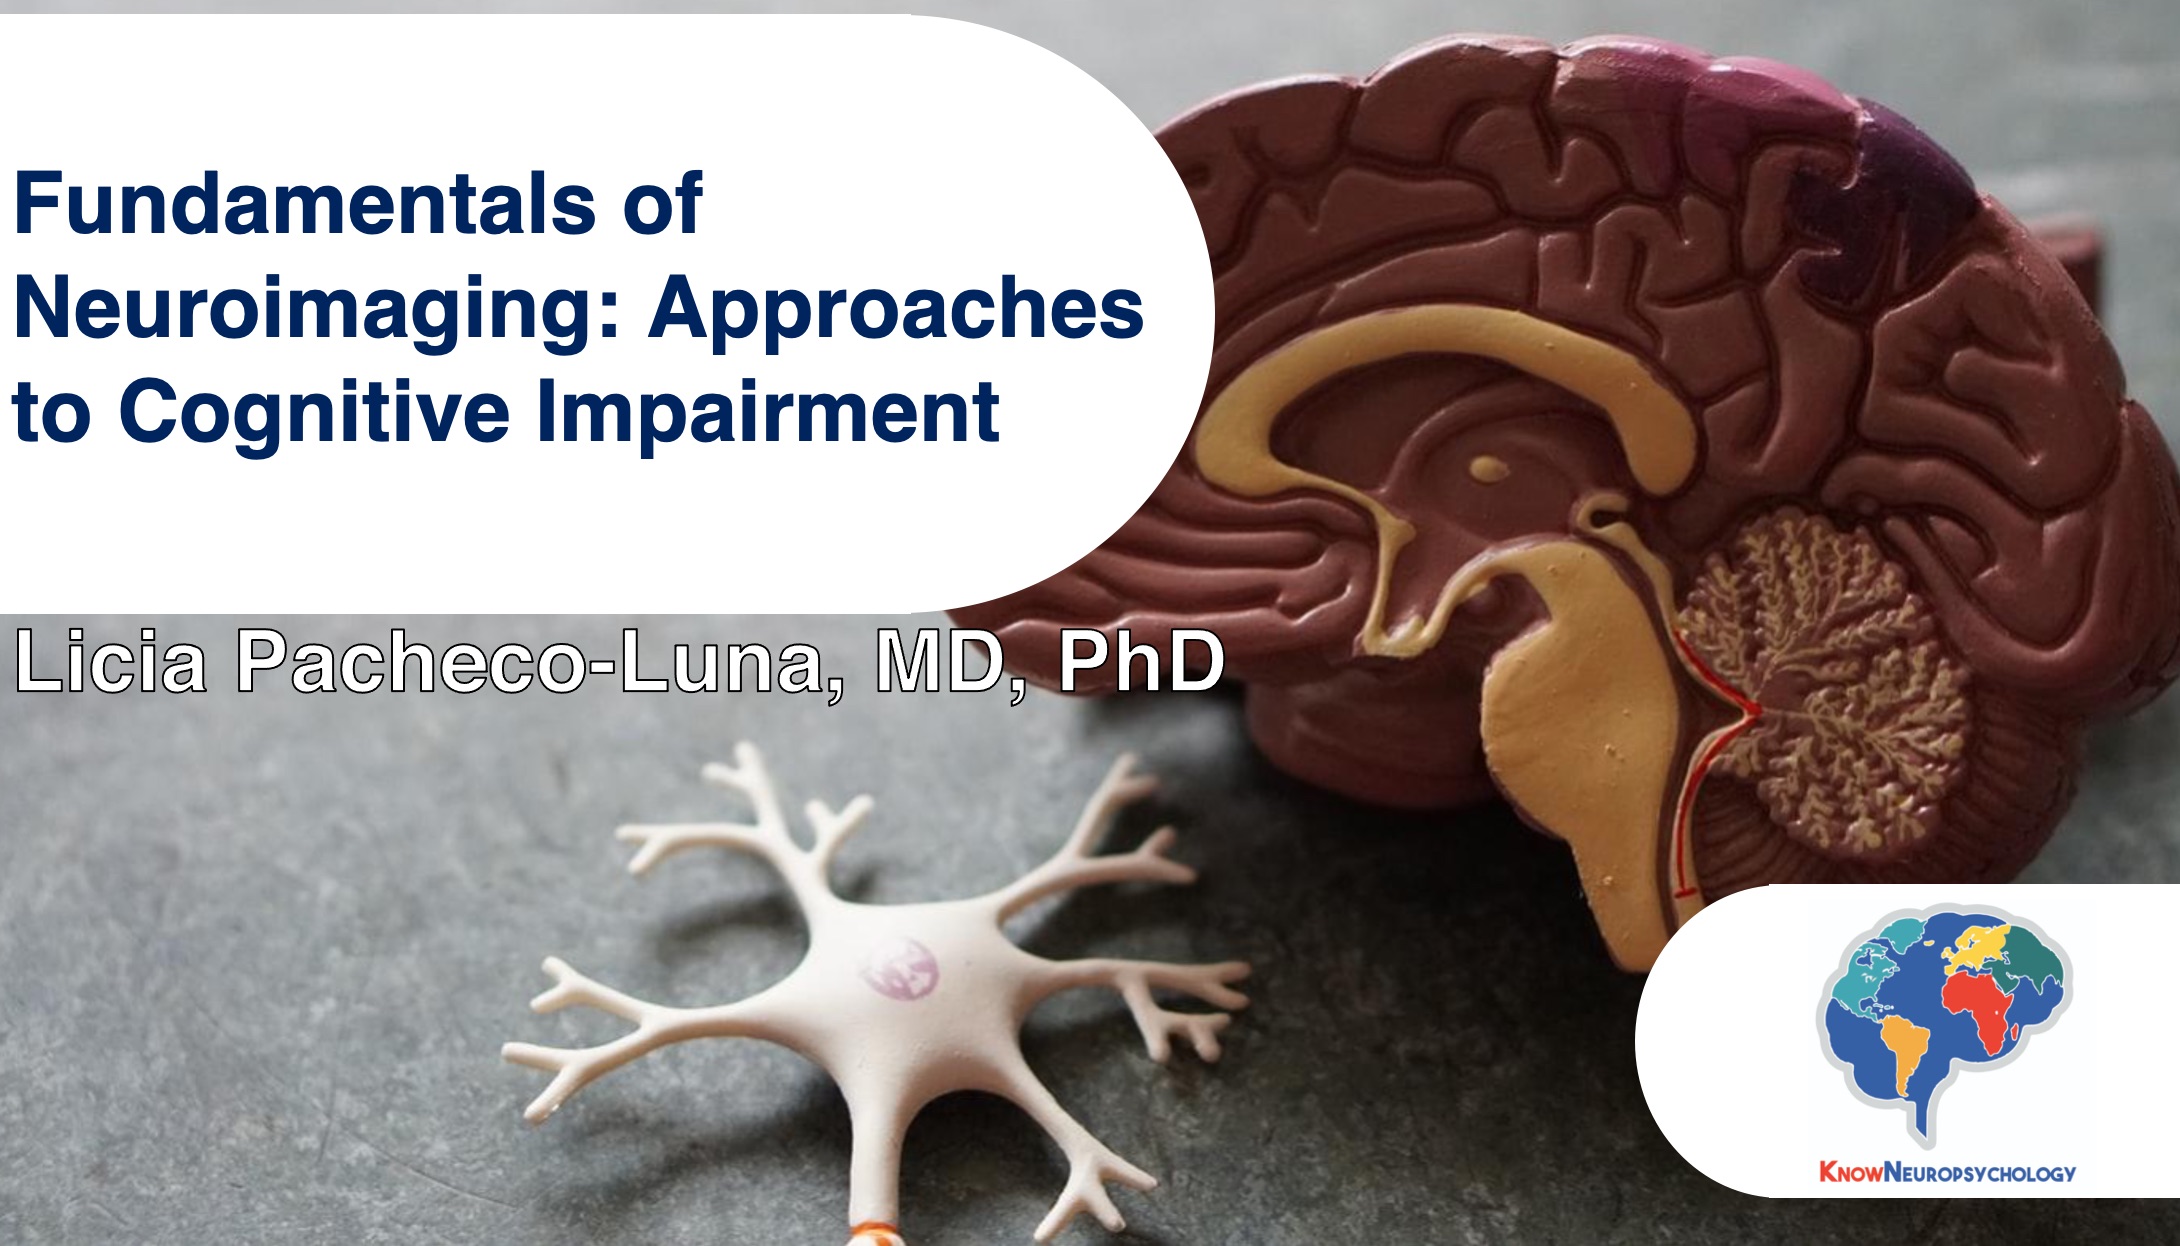 Fundamentals of Neuroimaging: Approaches to Cognitive Impairment with Dr. Licia Pacheco-Luna